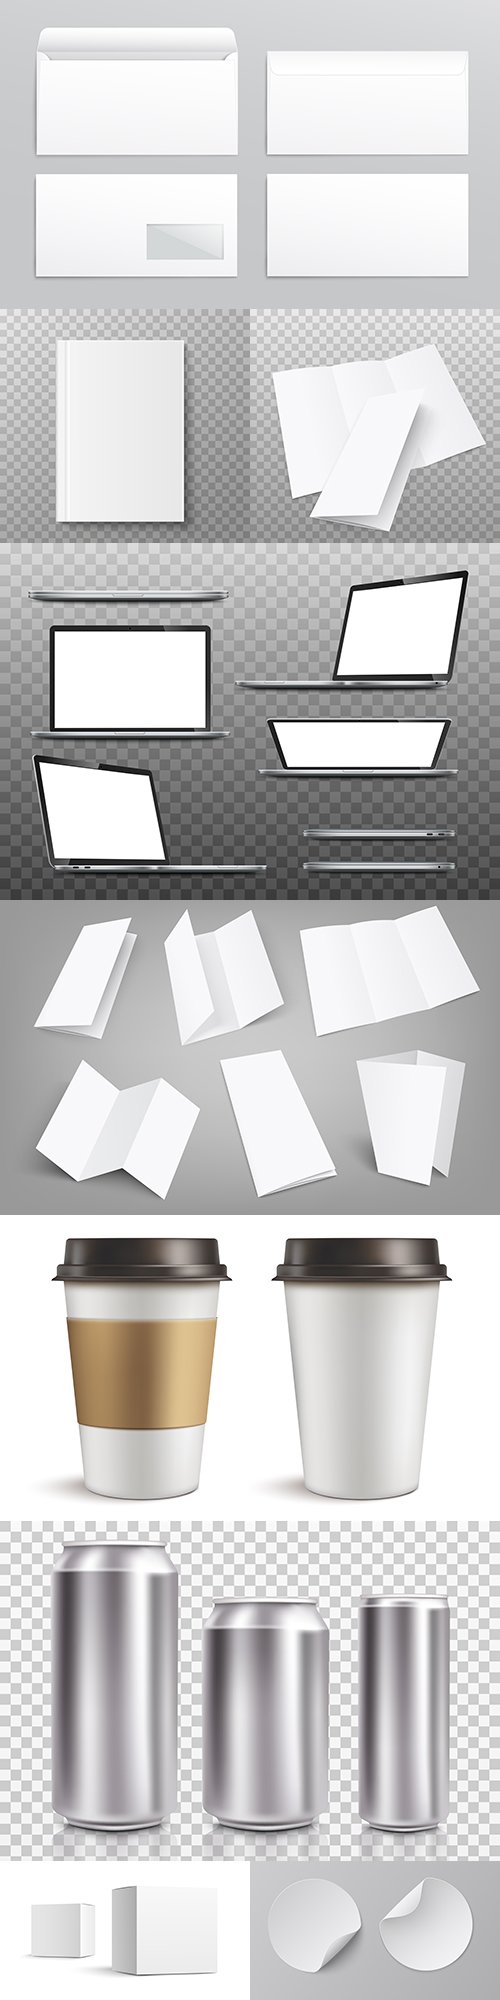 Realistic templates for design collection illustrations